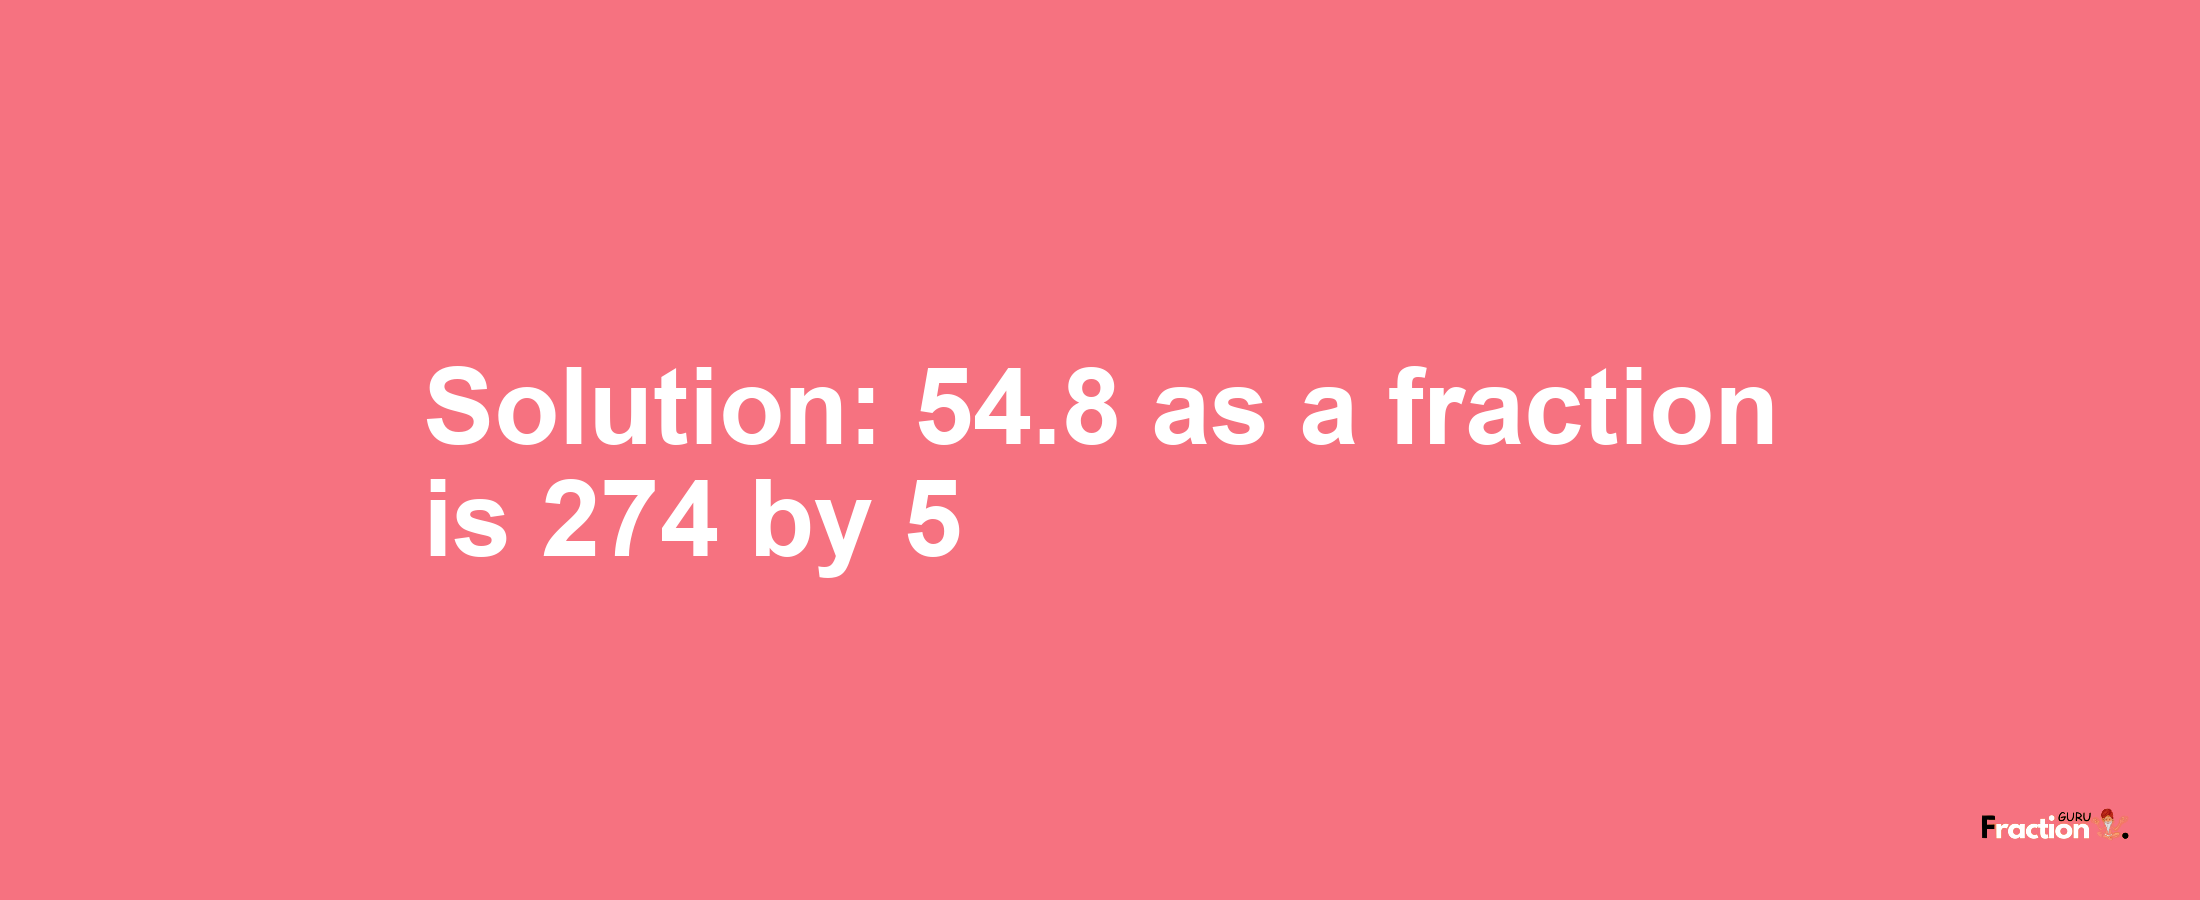 Solution:54.8 as a fraction is 274/5